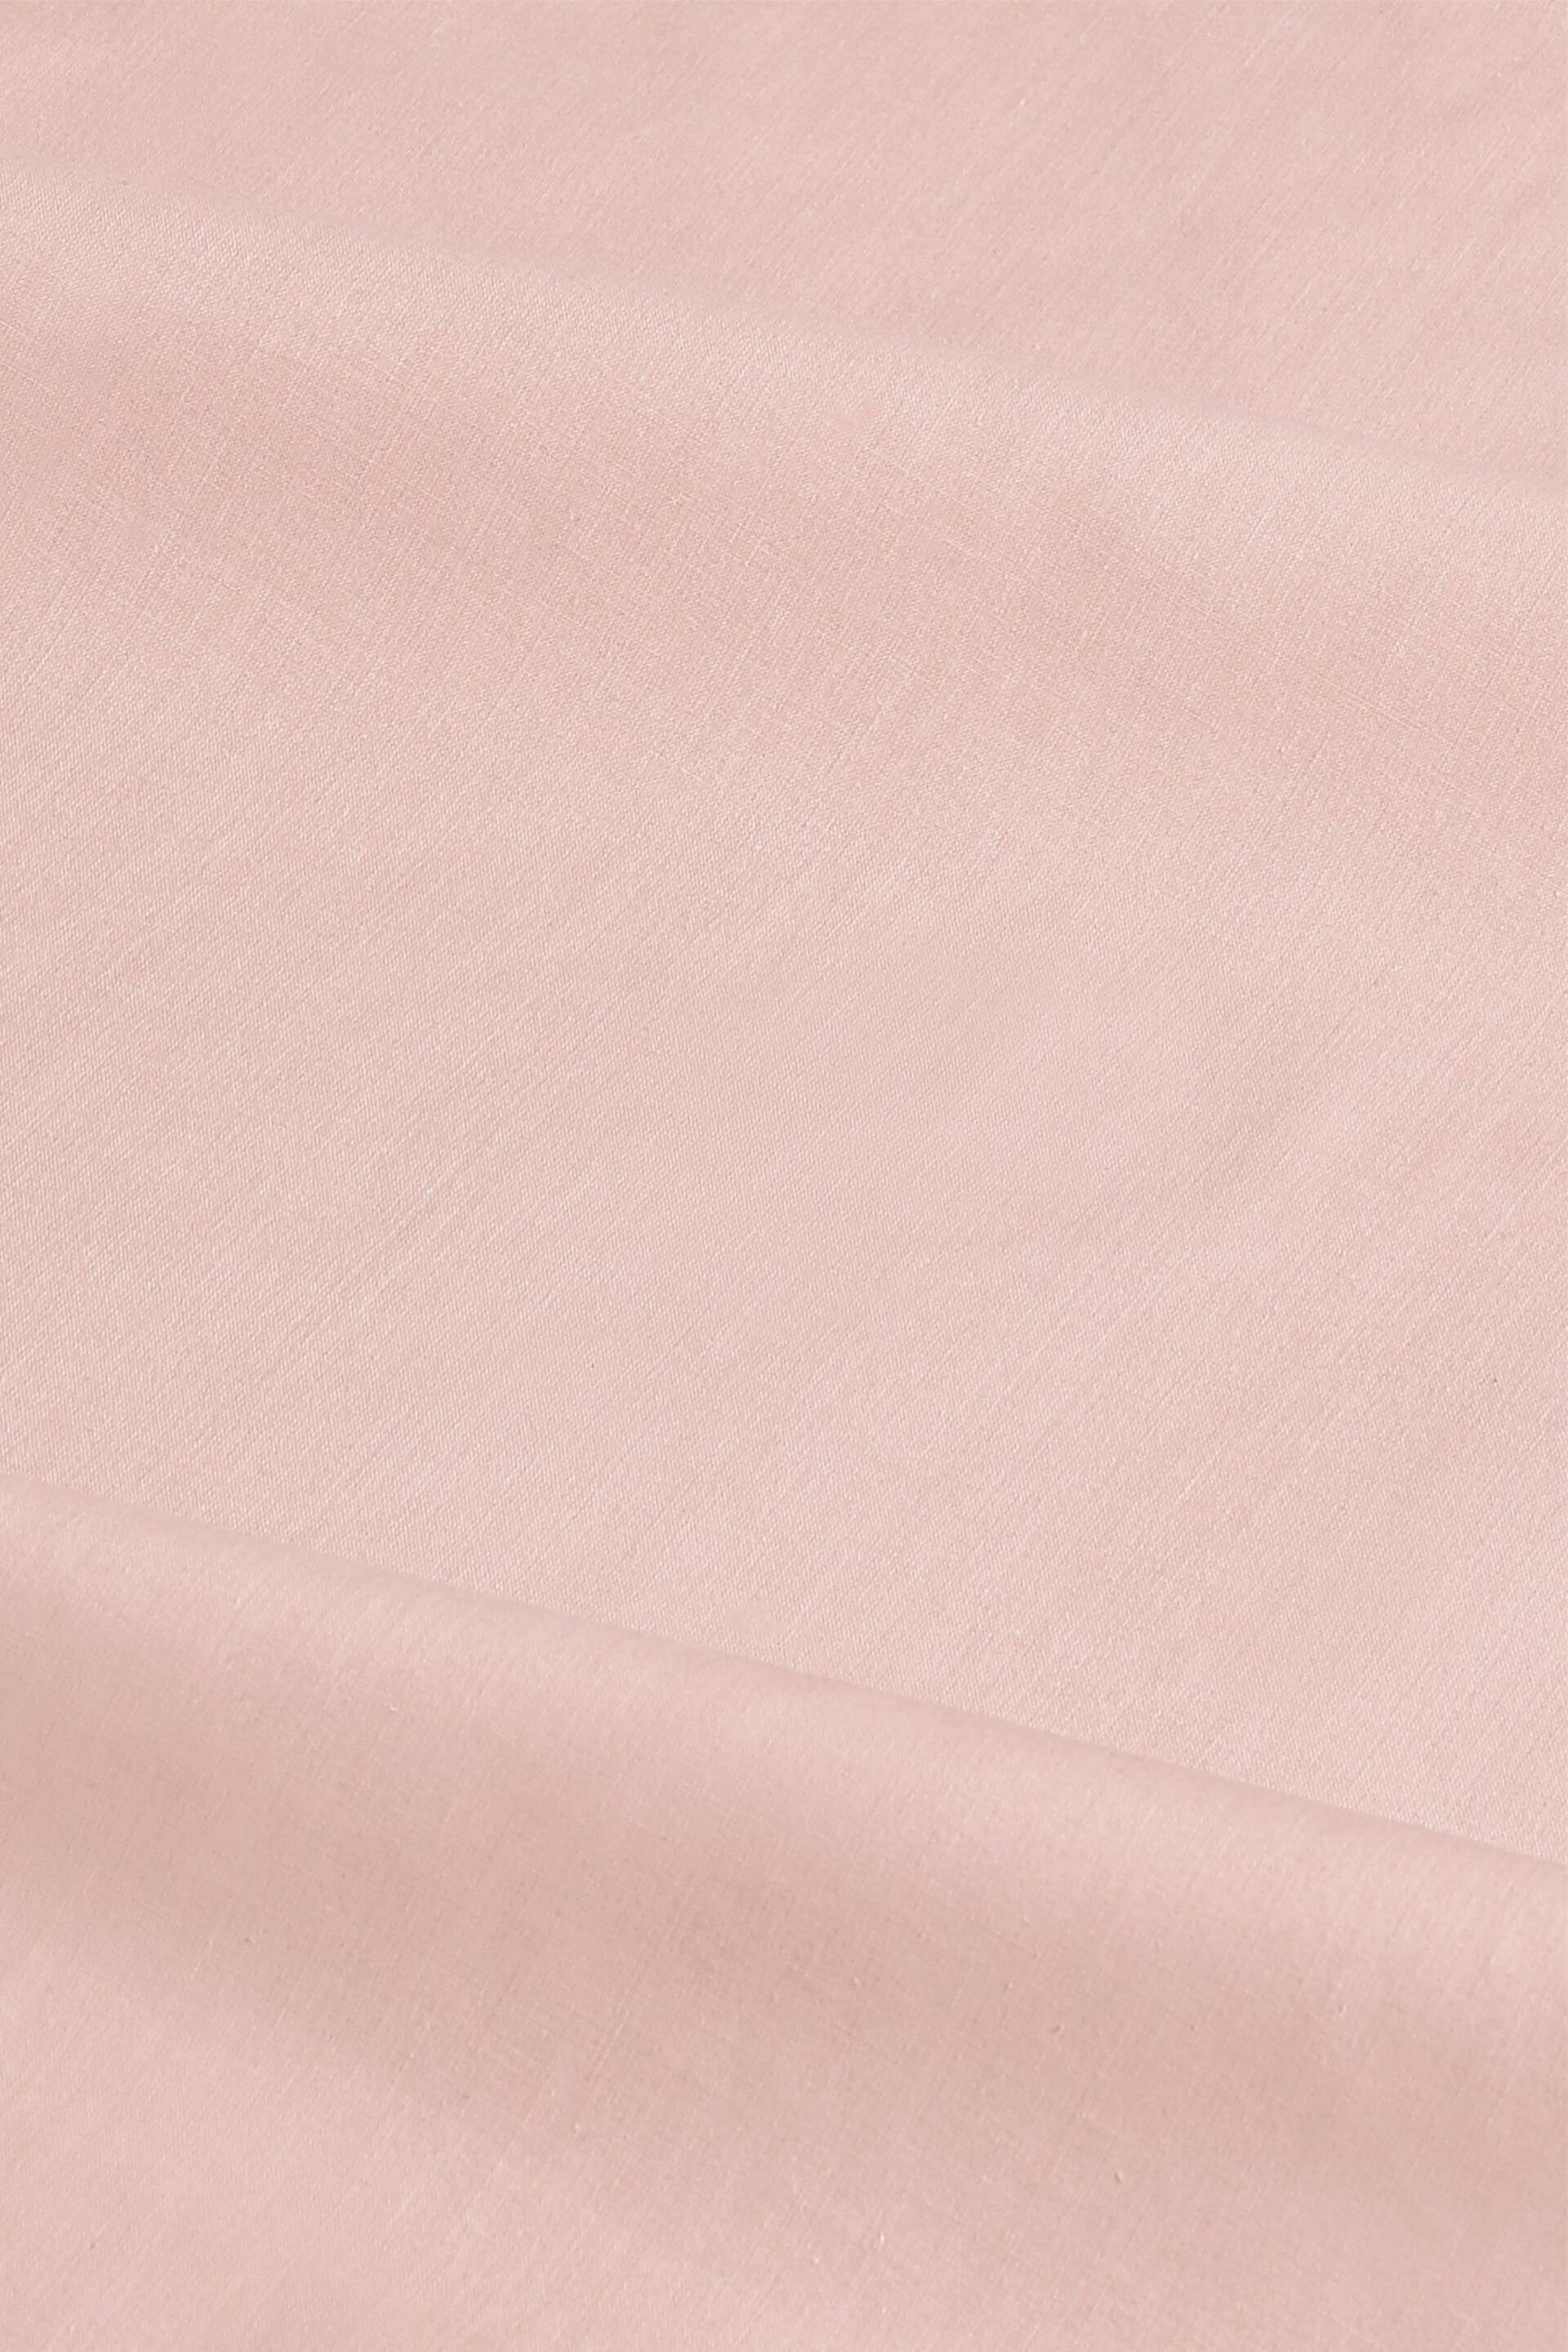 Pink Easy Care Polycotton Plain Duvet Cover and Pillowcase Set - Image 6 of 6